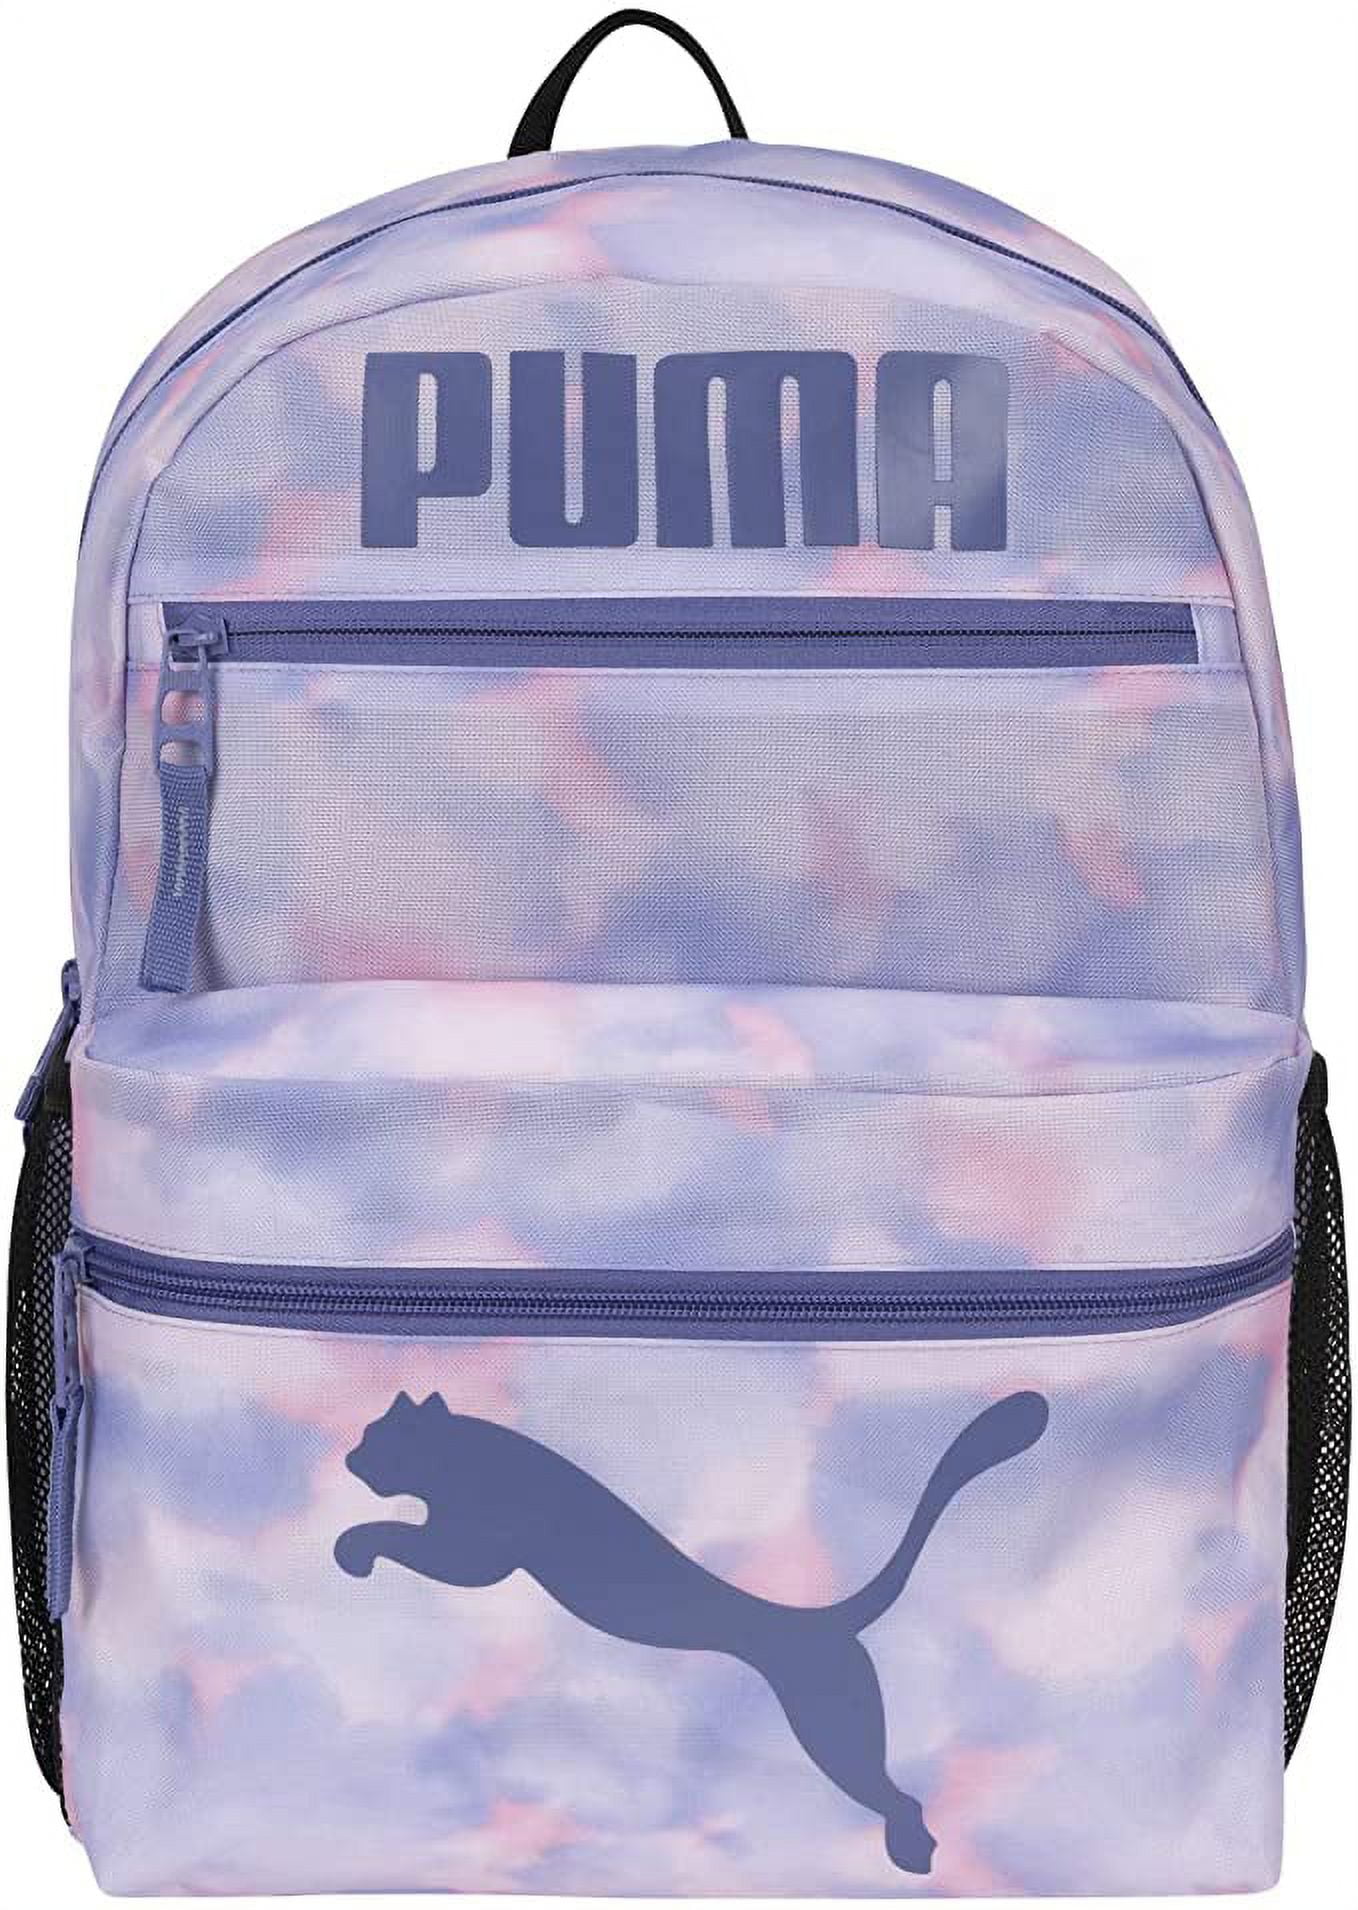 PUMA School College Bag for Girls and Boys 25 L Laptop Backpack Maroon -  Price in India | Flipkart.com